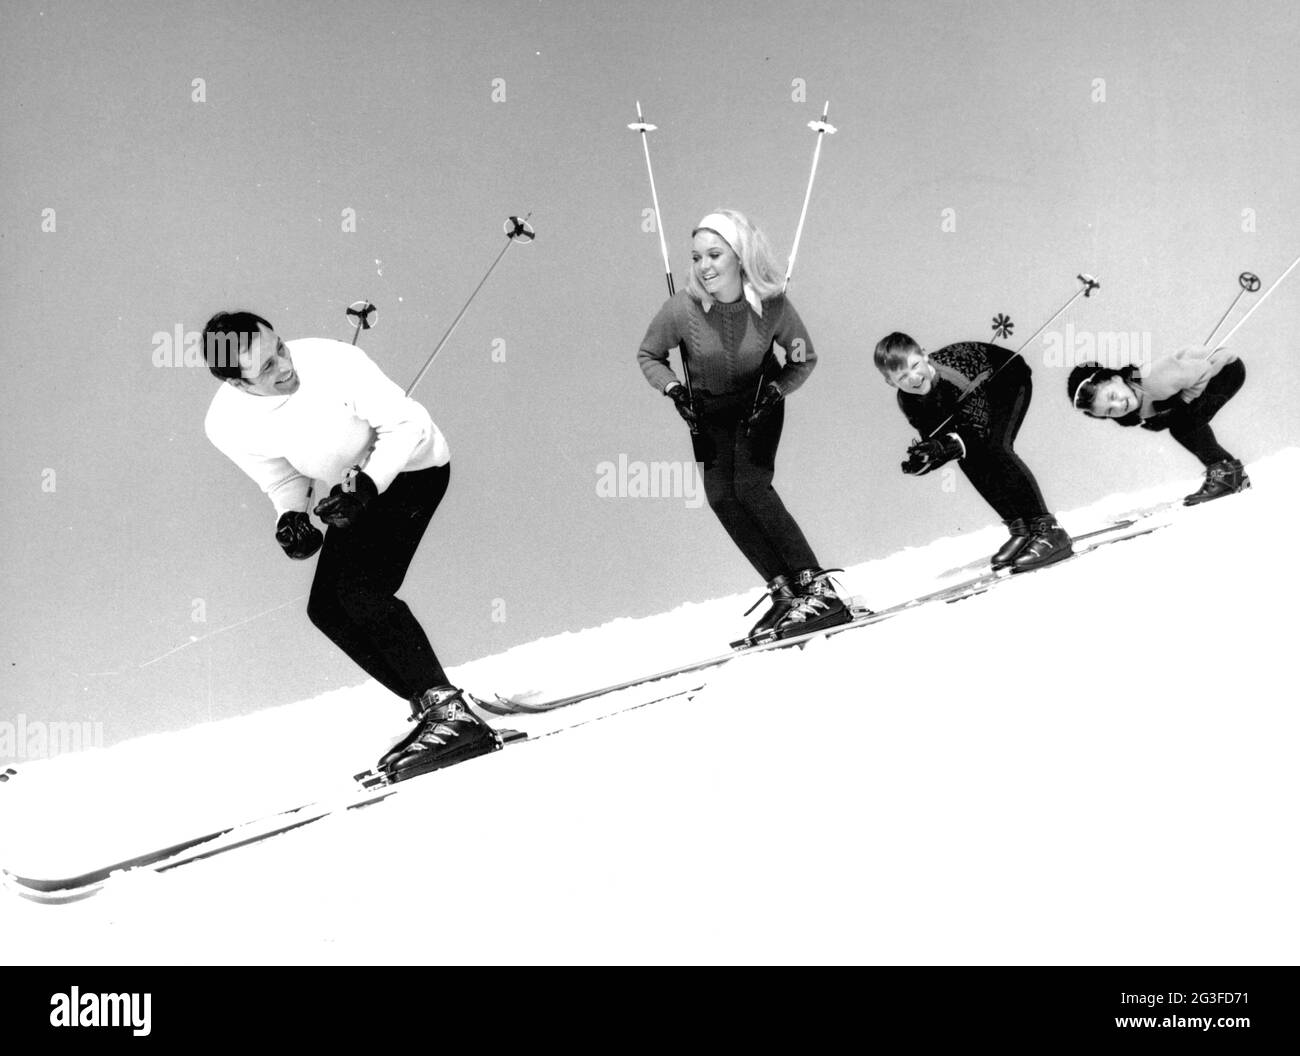 Sport, Wintersport, Skifahren, Familienskifahren, 70er Jahre, ADDITIONAL-RIGHTS-CLEARANCE-INFO-NOT-AVAILABLE Stockfoto